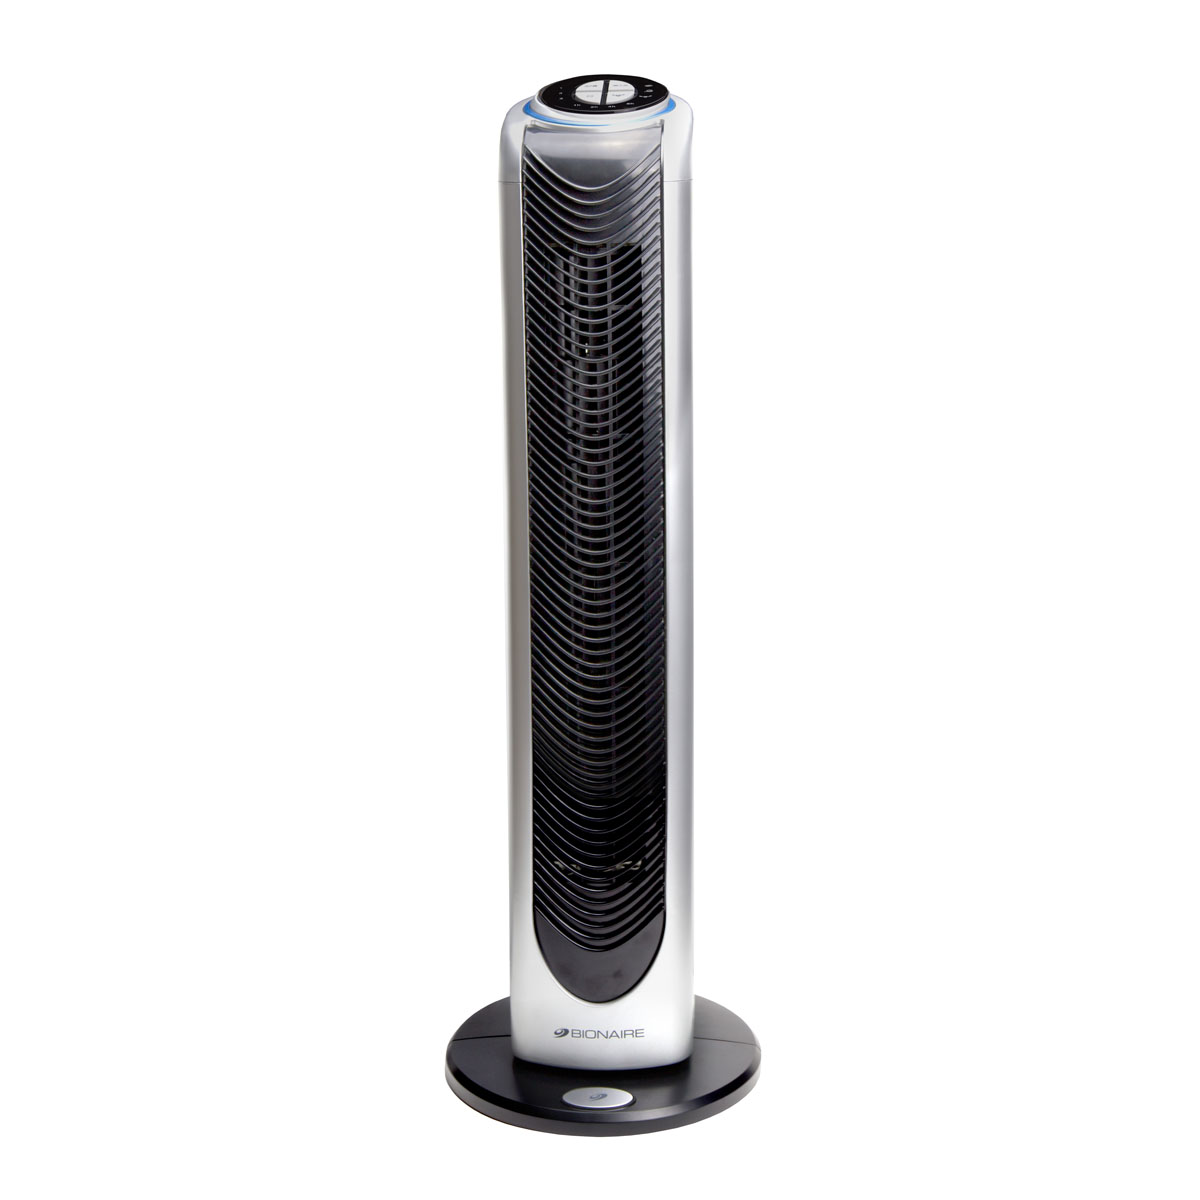 Bionaire 30 Inch Digital Tower Fan With Remote Control Bt3813bs Cn Bionaire Canada